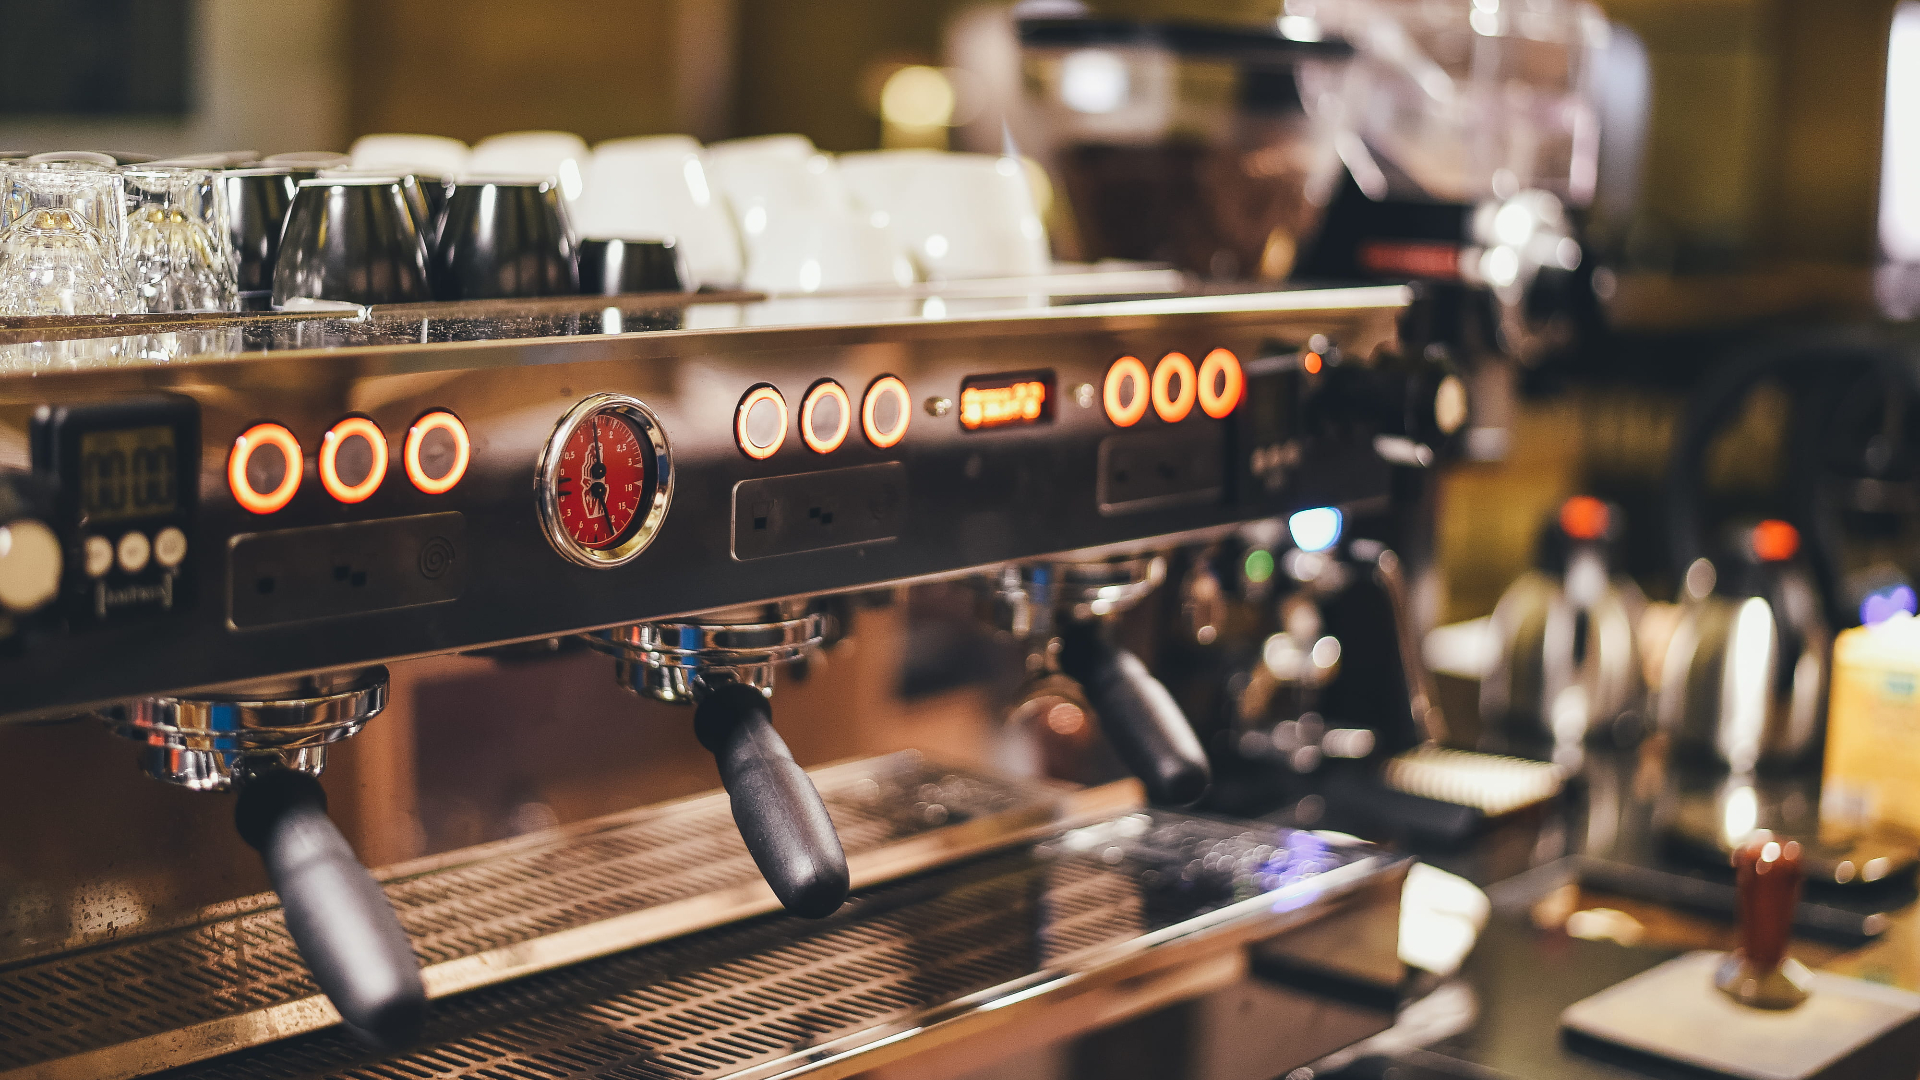 Maintenance and Cleaning Tips for Coffee Equipment